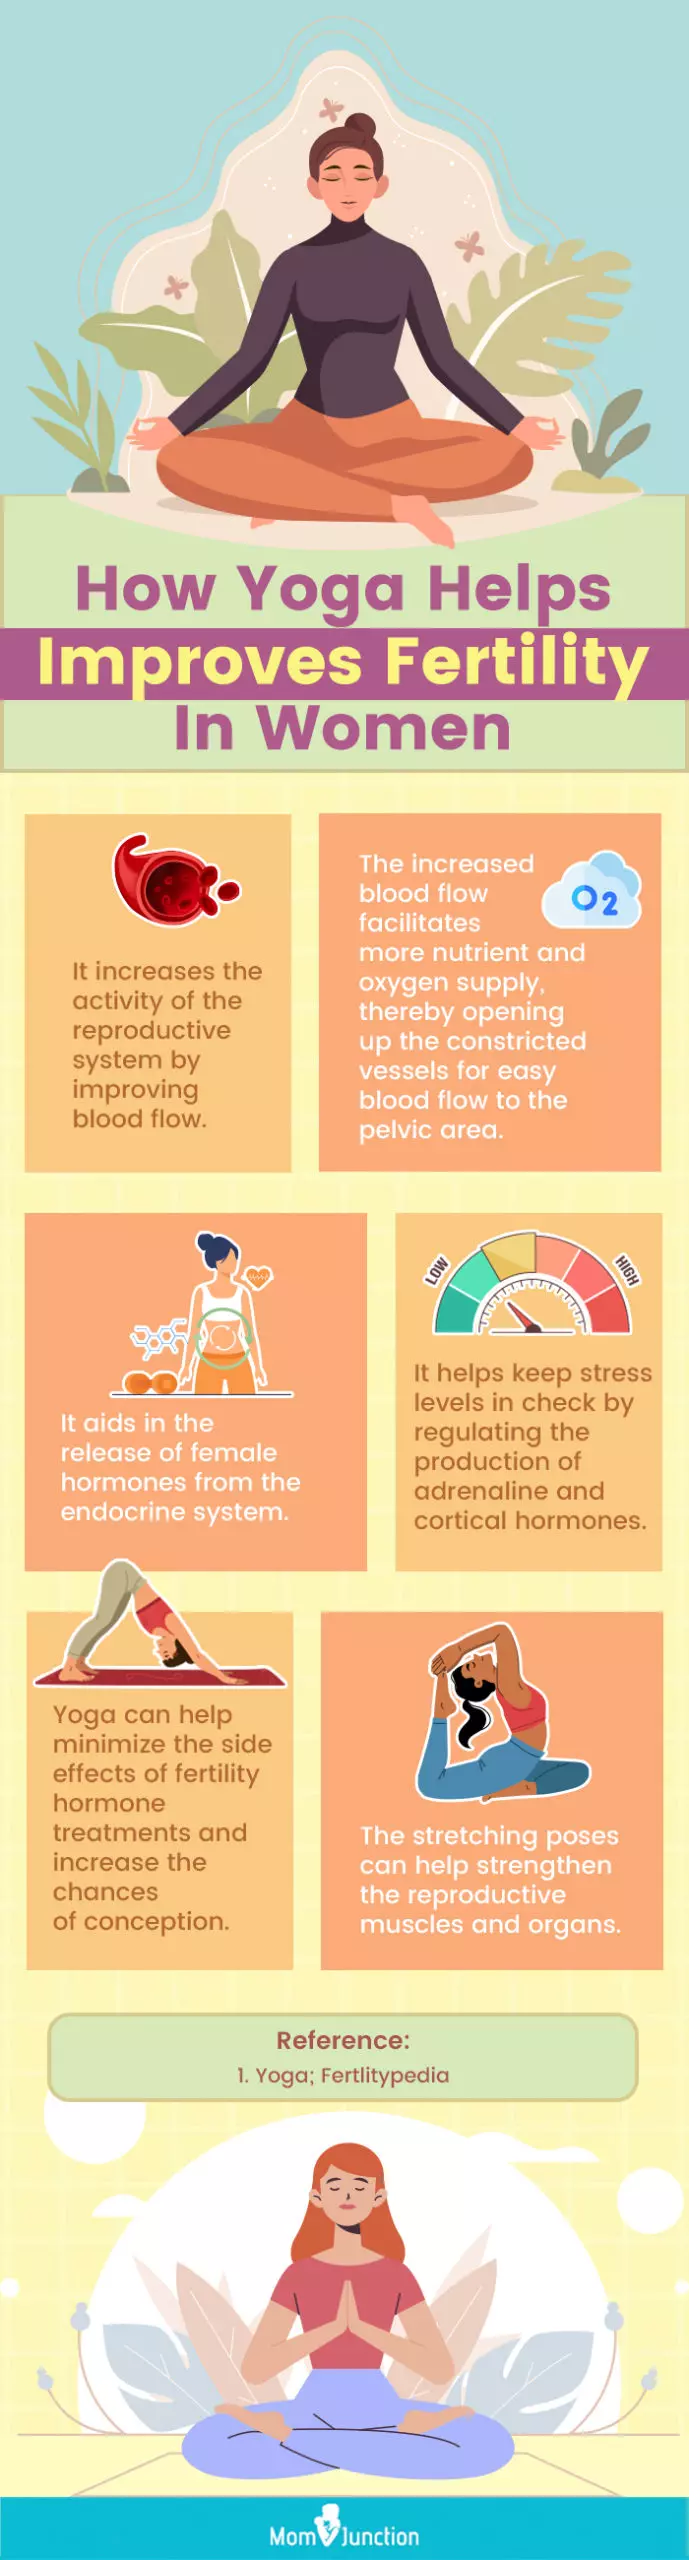 how yoga helps improves fertility in women (infographic)